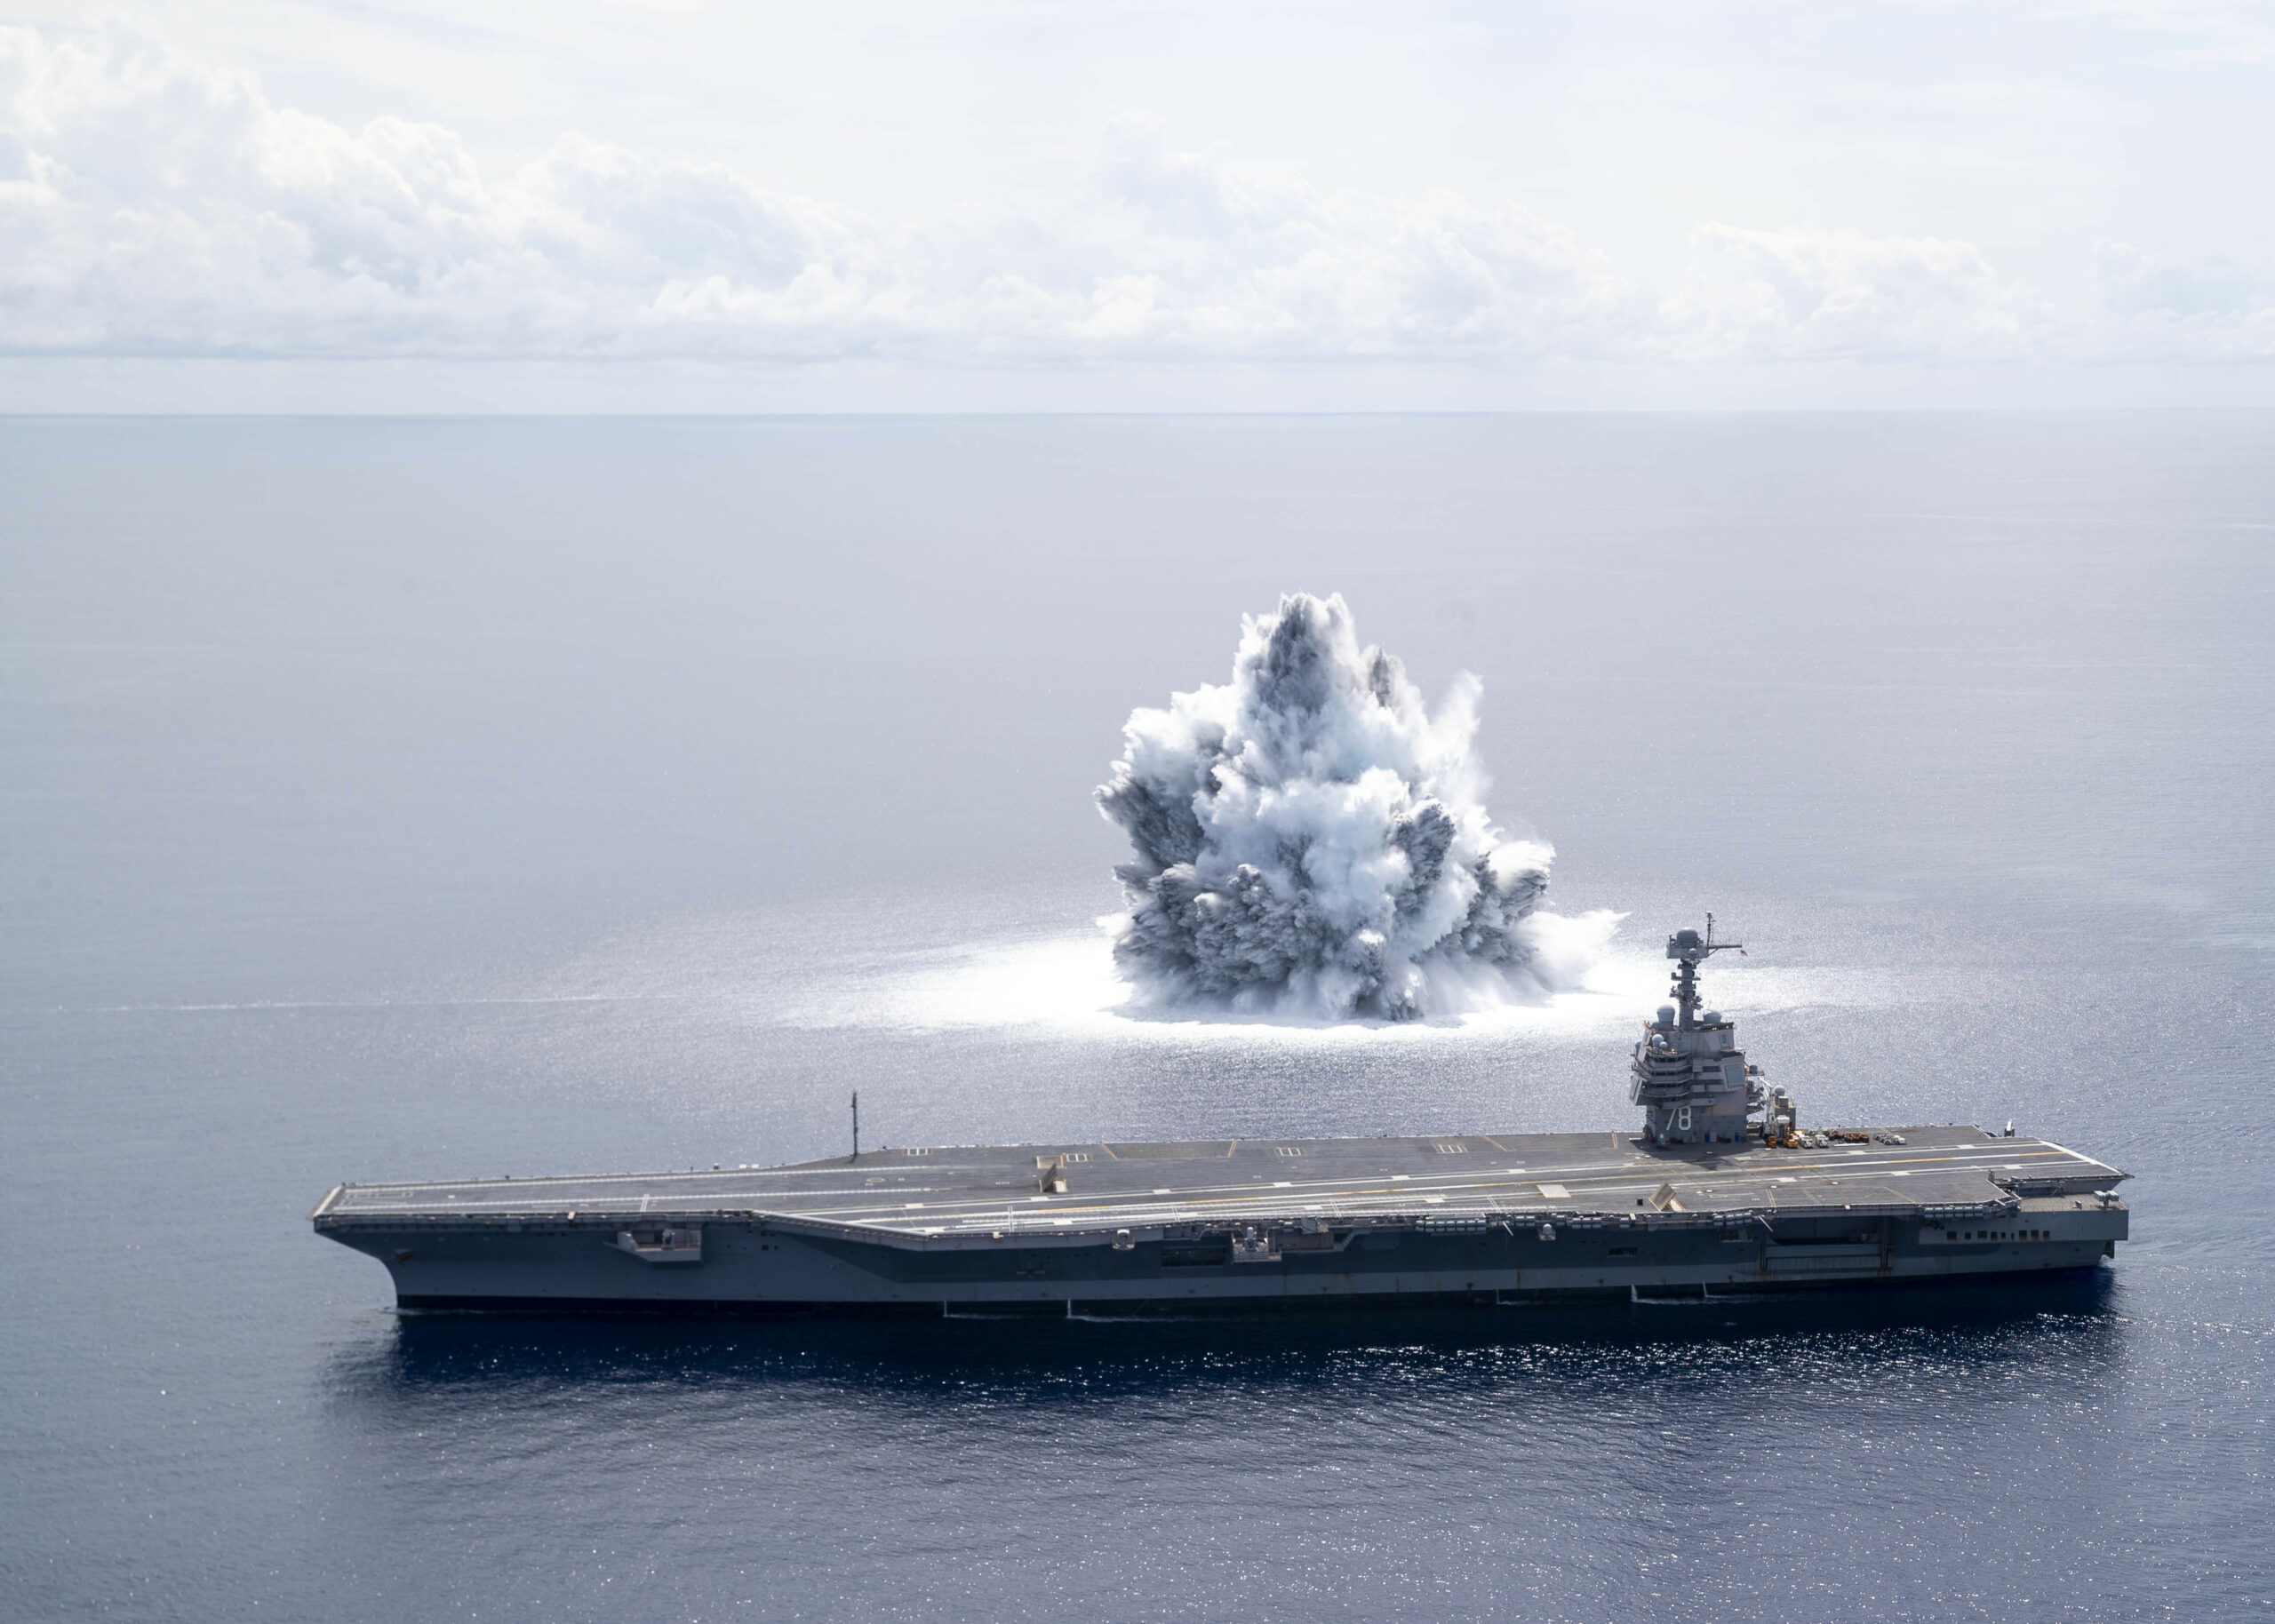 The aircraft carrier USS Gerald R. Ford (CVN 78) completes the first scheduled explosive event of Full Ship Shock Trials while underway in the Atlantic Ocean, June 18, 2021